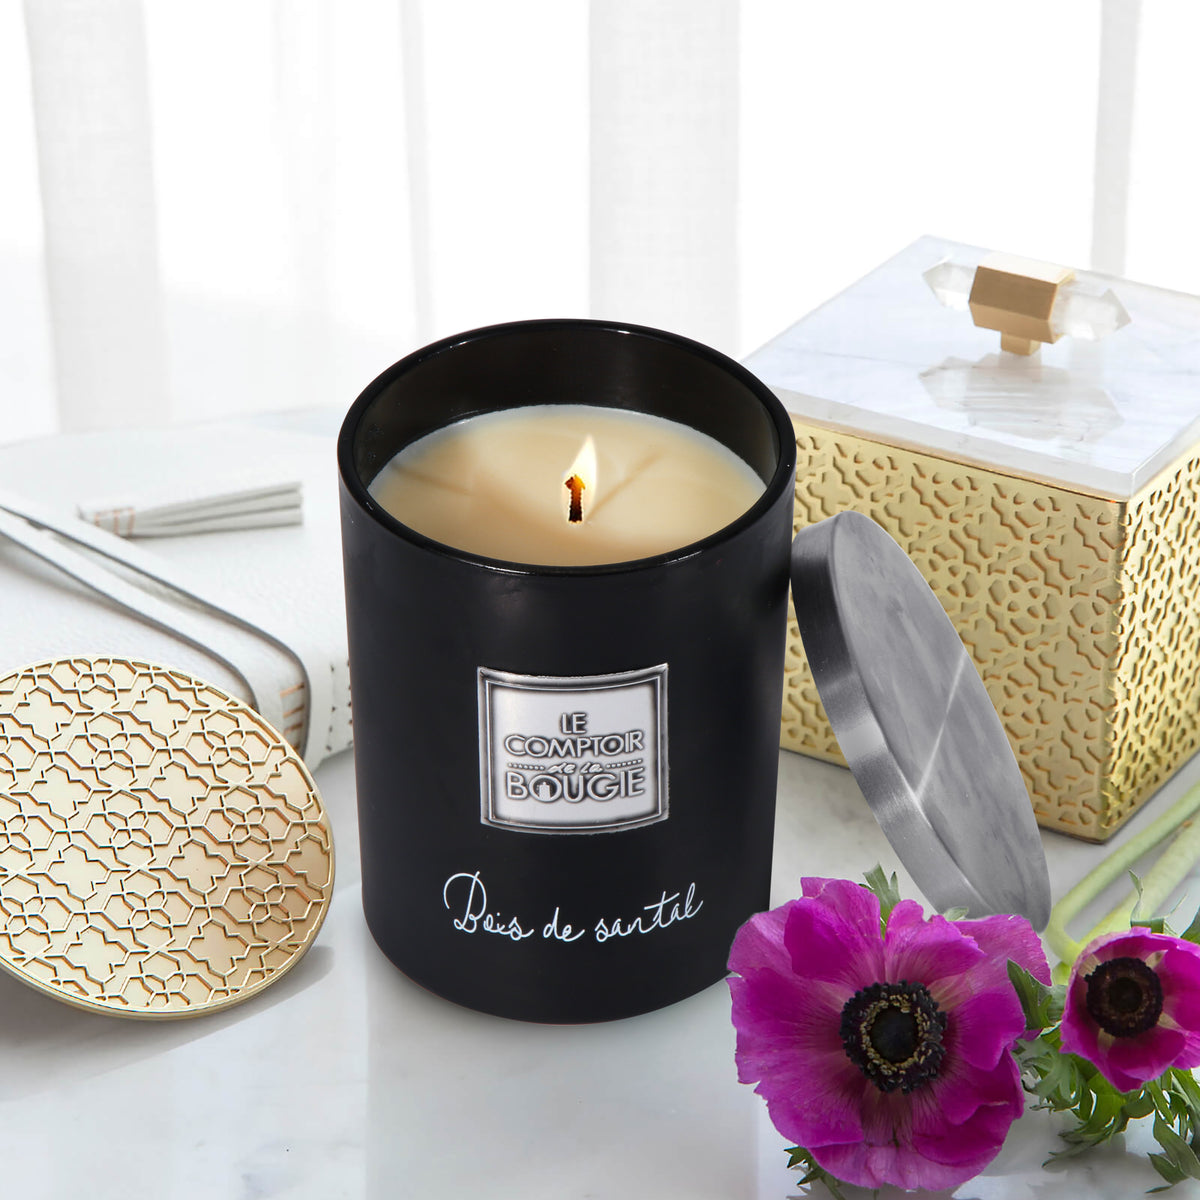 Samaná Signature Travel Tin Scented Candle, Luxury Candles Inspired by the  Dominican Republic